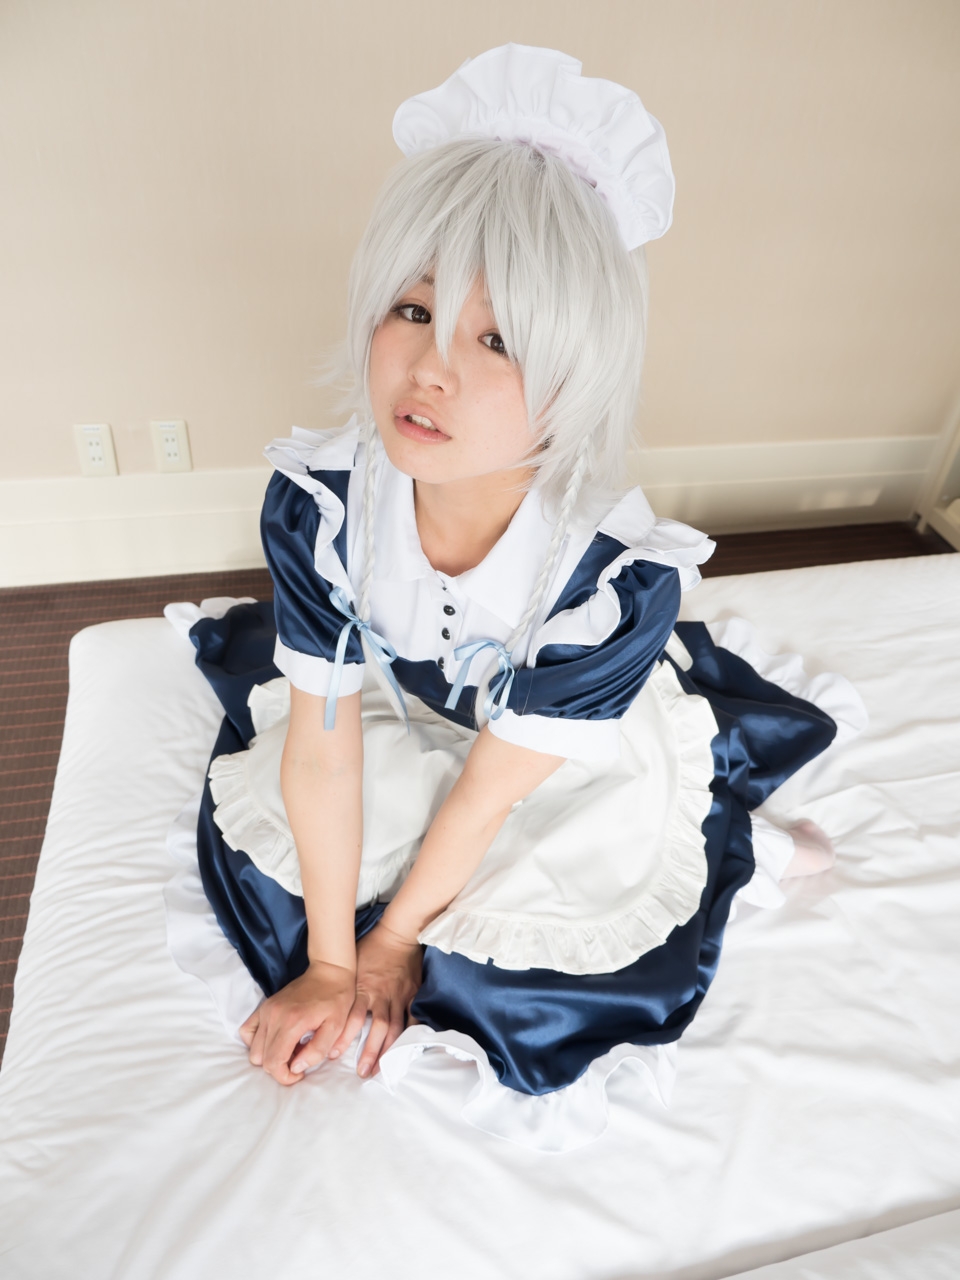 [Sakaki Cosplay Mistress] Sakaki Cosplay Mistress DL 001 (Touhou Project) 187